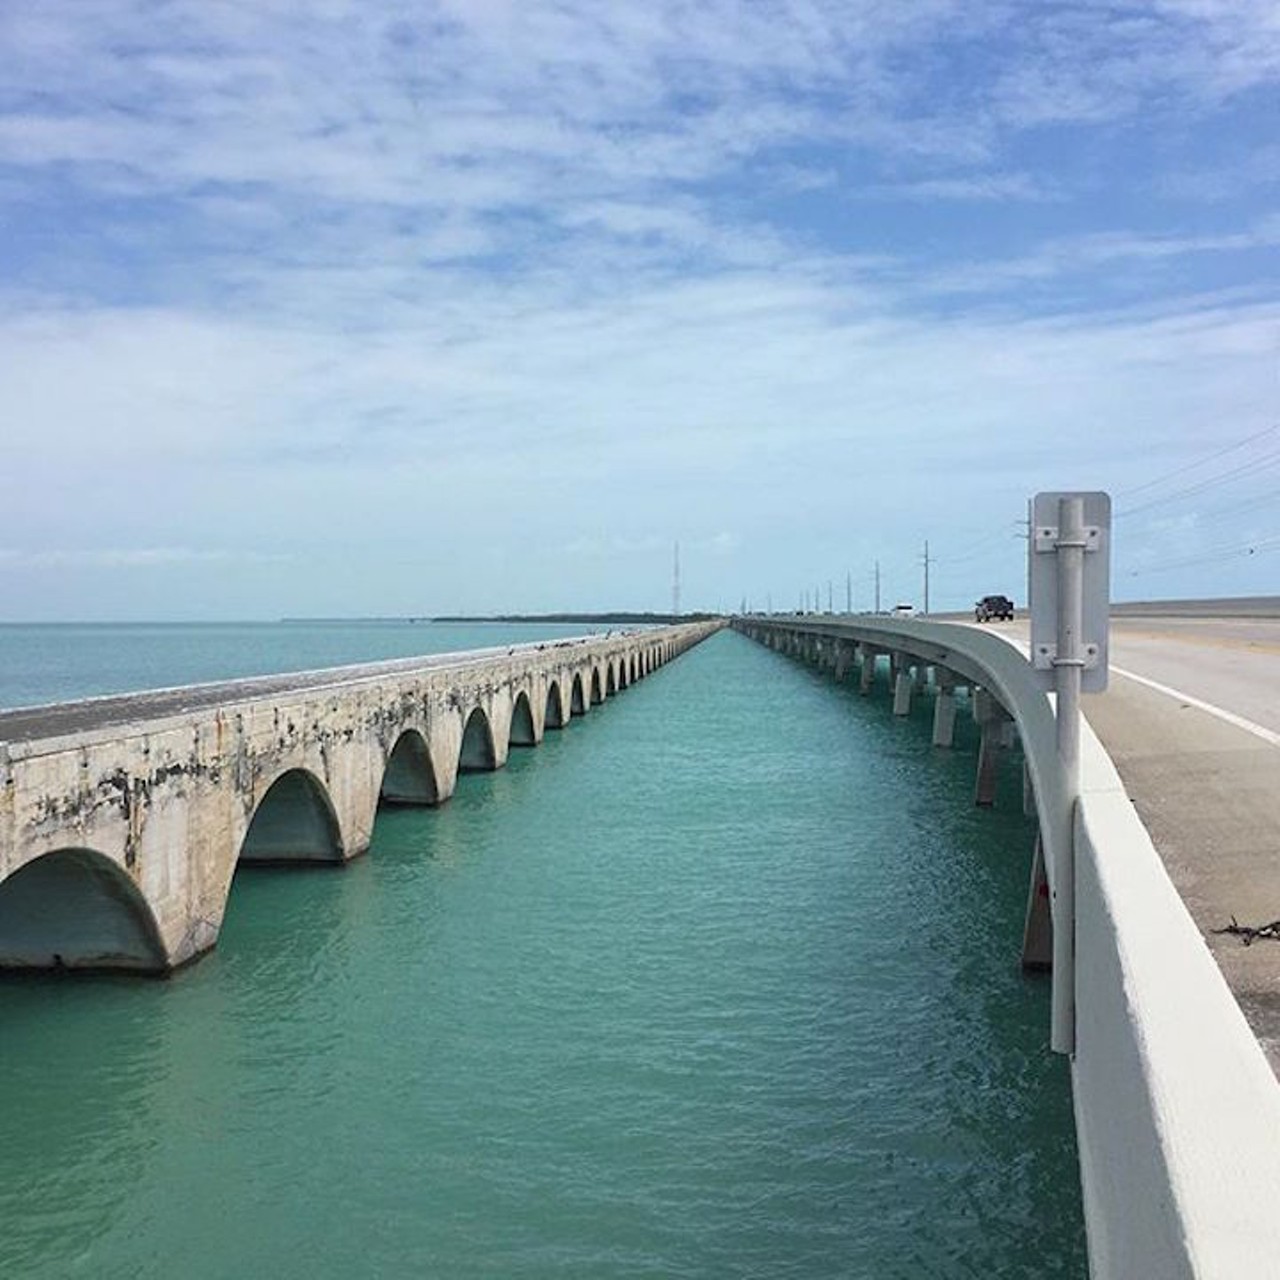 Florida Keys
Take in both the Atlantic Ocean and the Gulf of Mexico at the same time, with there being nothing but you, your car, a bridge, and more water surrounding you than anyone can even begin to imagine. There&#146;s stops along the way too to fuel your state park and museum needs in case you need to take a break.
Photo via antwahn_matas/Instagram